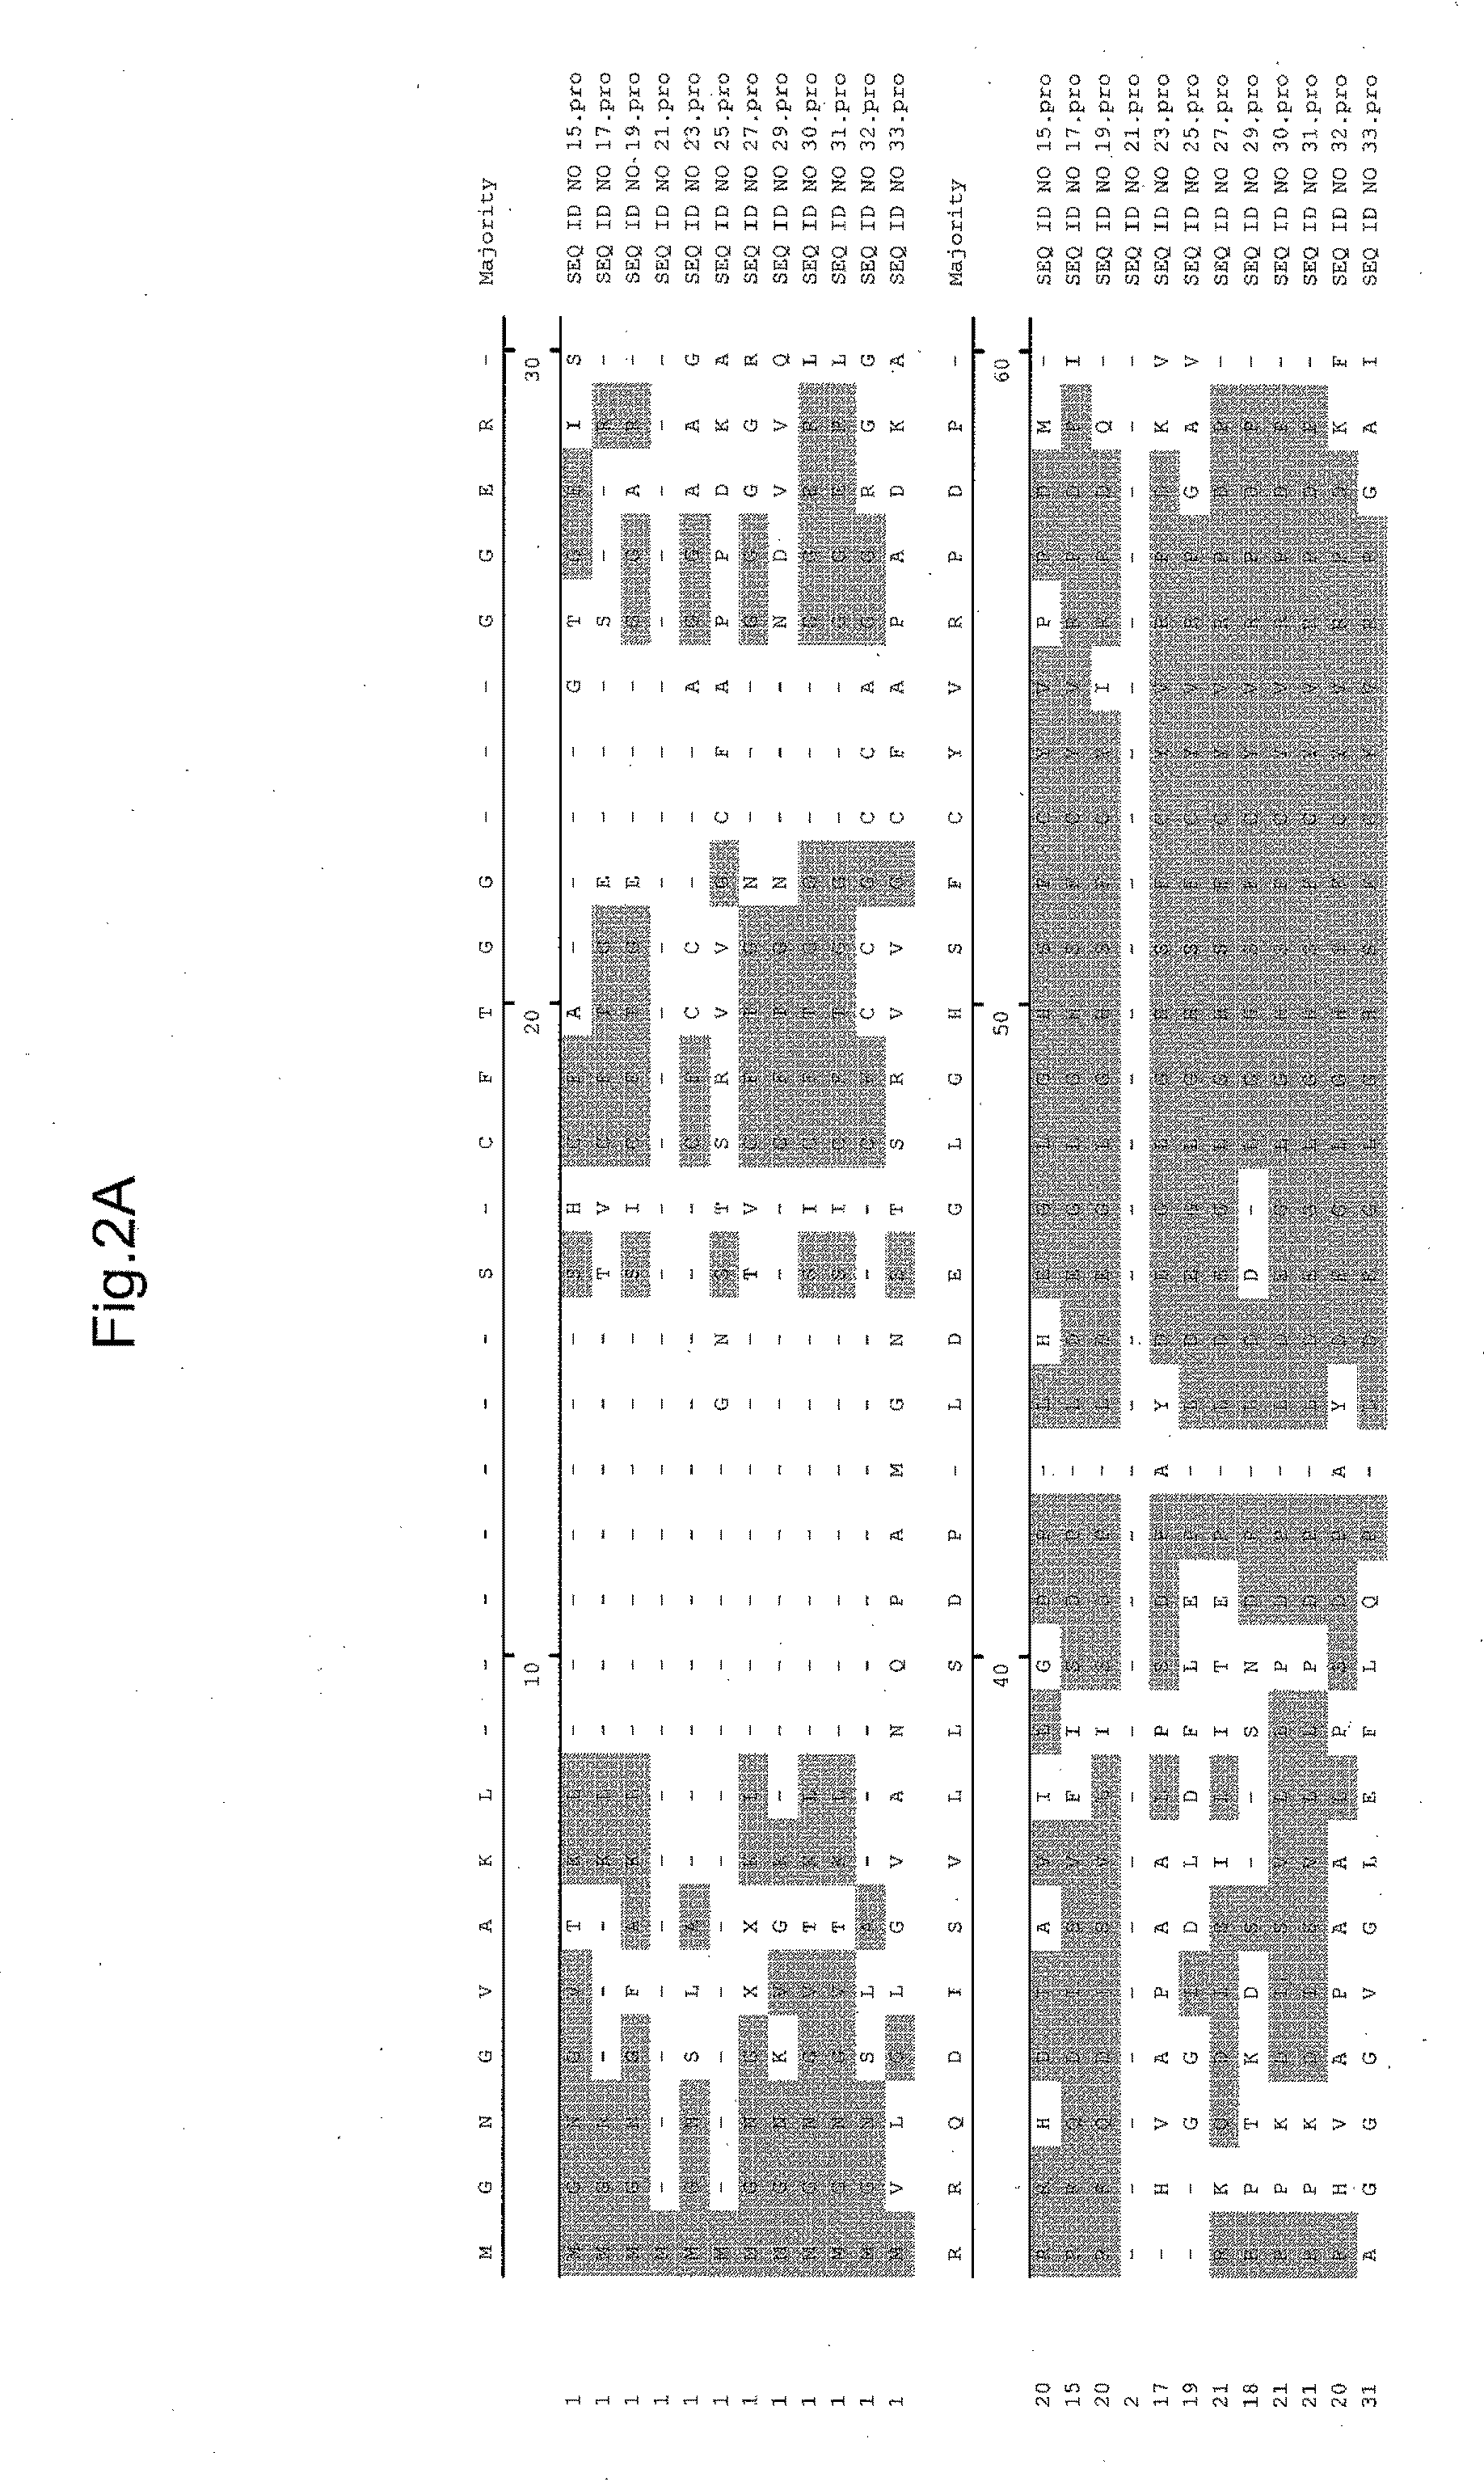 Plants with altered root architecture, related constructs and methods involving genes encoding protein phophatase 2c (PP2C) polypeptides and homologs thereof